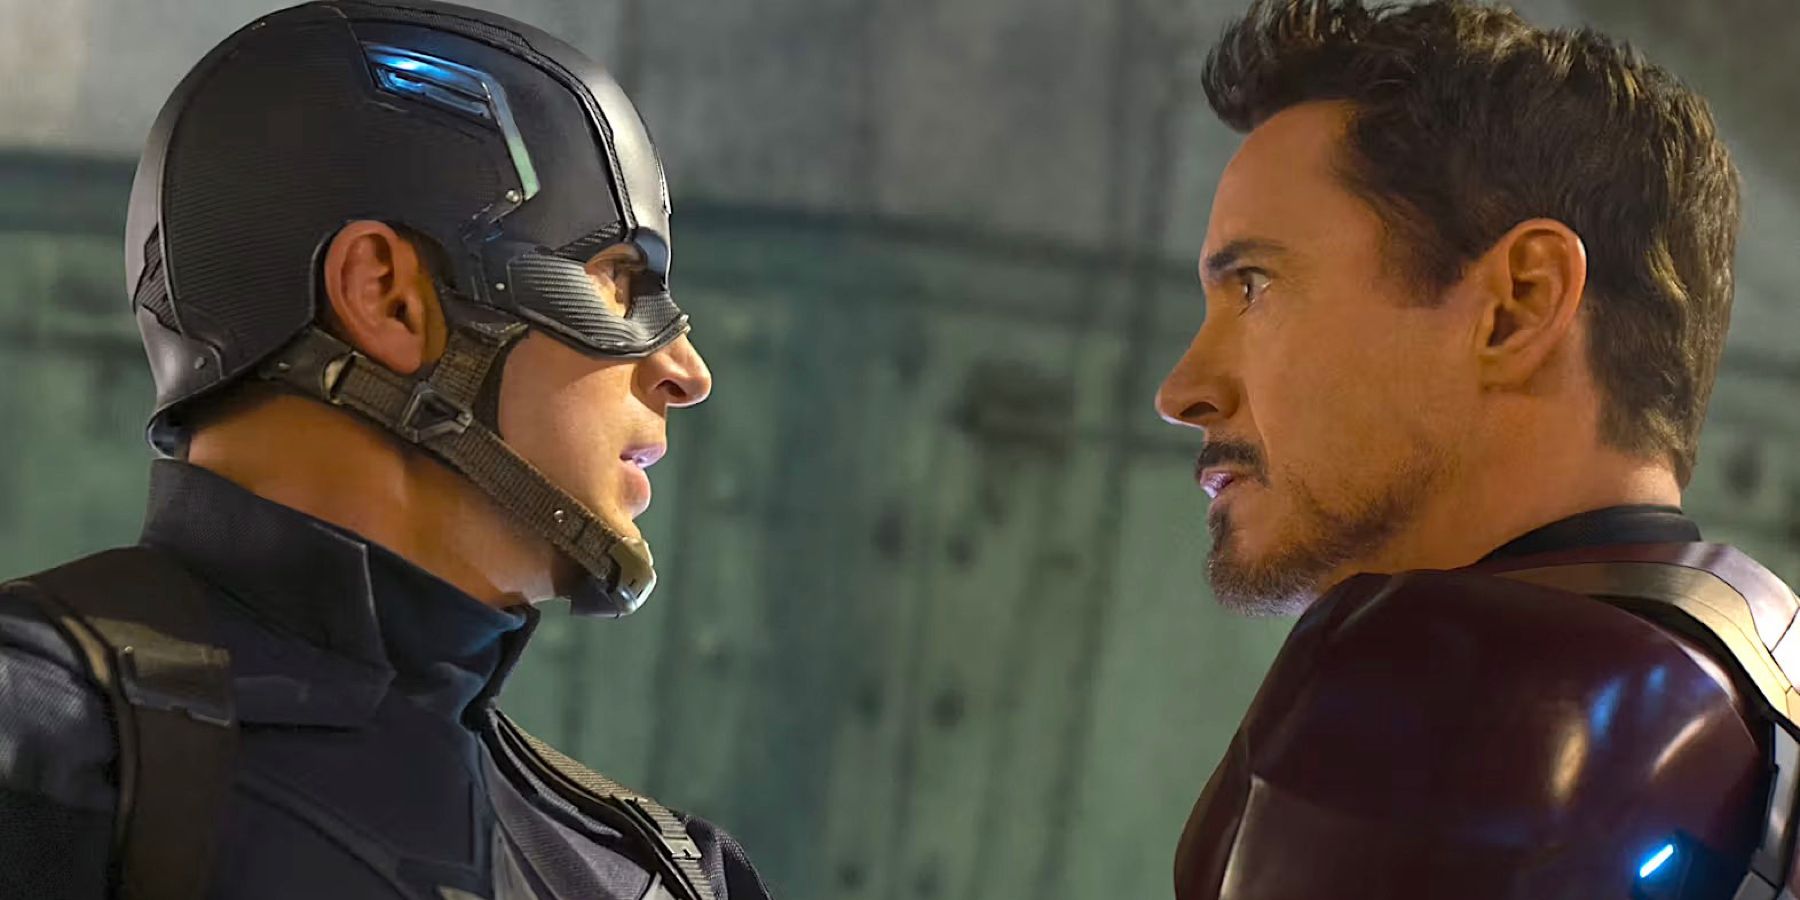 Captain America (played by actor Chris Evans), and Iron Man (played by actor Robert Downey Jr.), stare each other down menacingly in Captain America: Civil War.